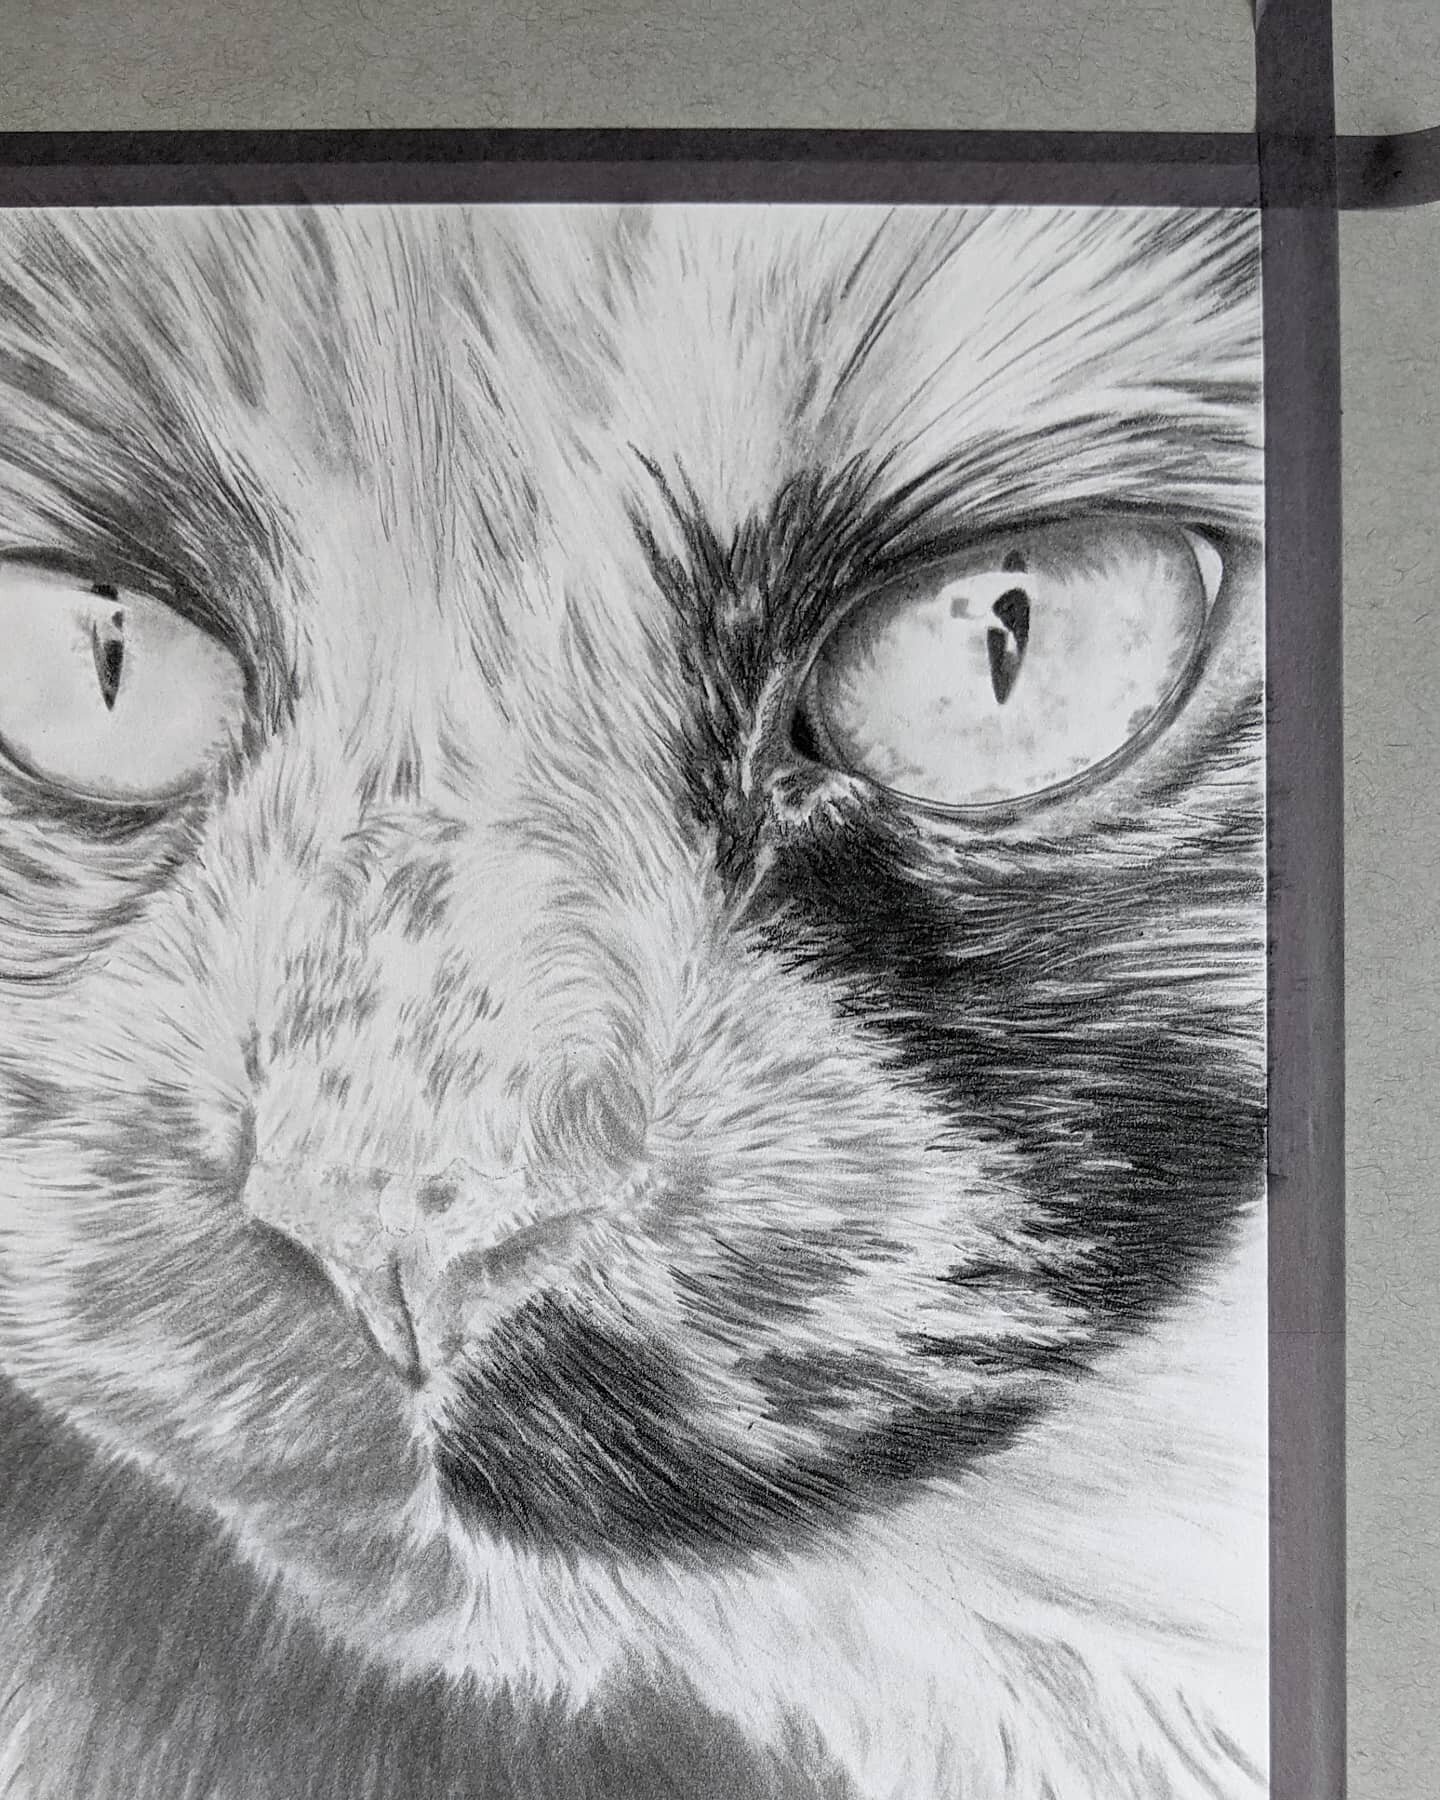 Emma. You must've been the perfect mix of sweet and FIERCE! 🐱...💥...🦁

Progress photo of Emma - 8x10 - charcoal on Strathmore Bristol paper.
.
.
.
Commissions are currently full for 2021.